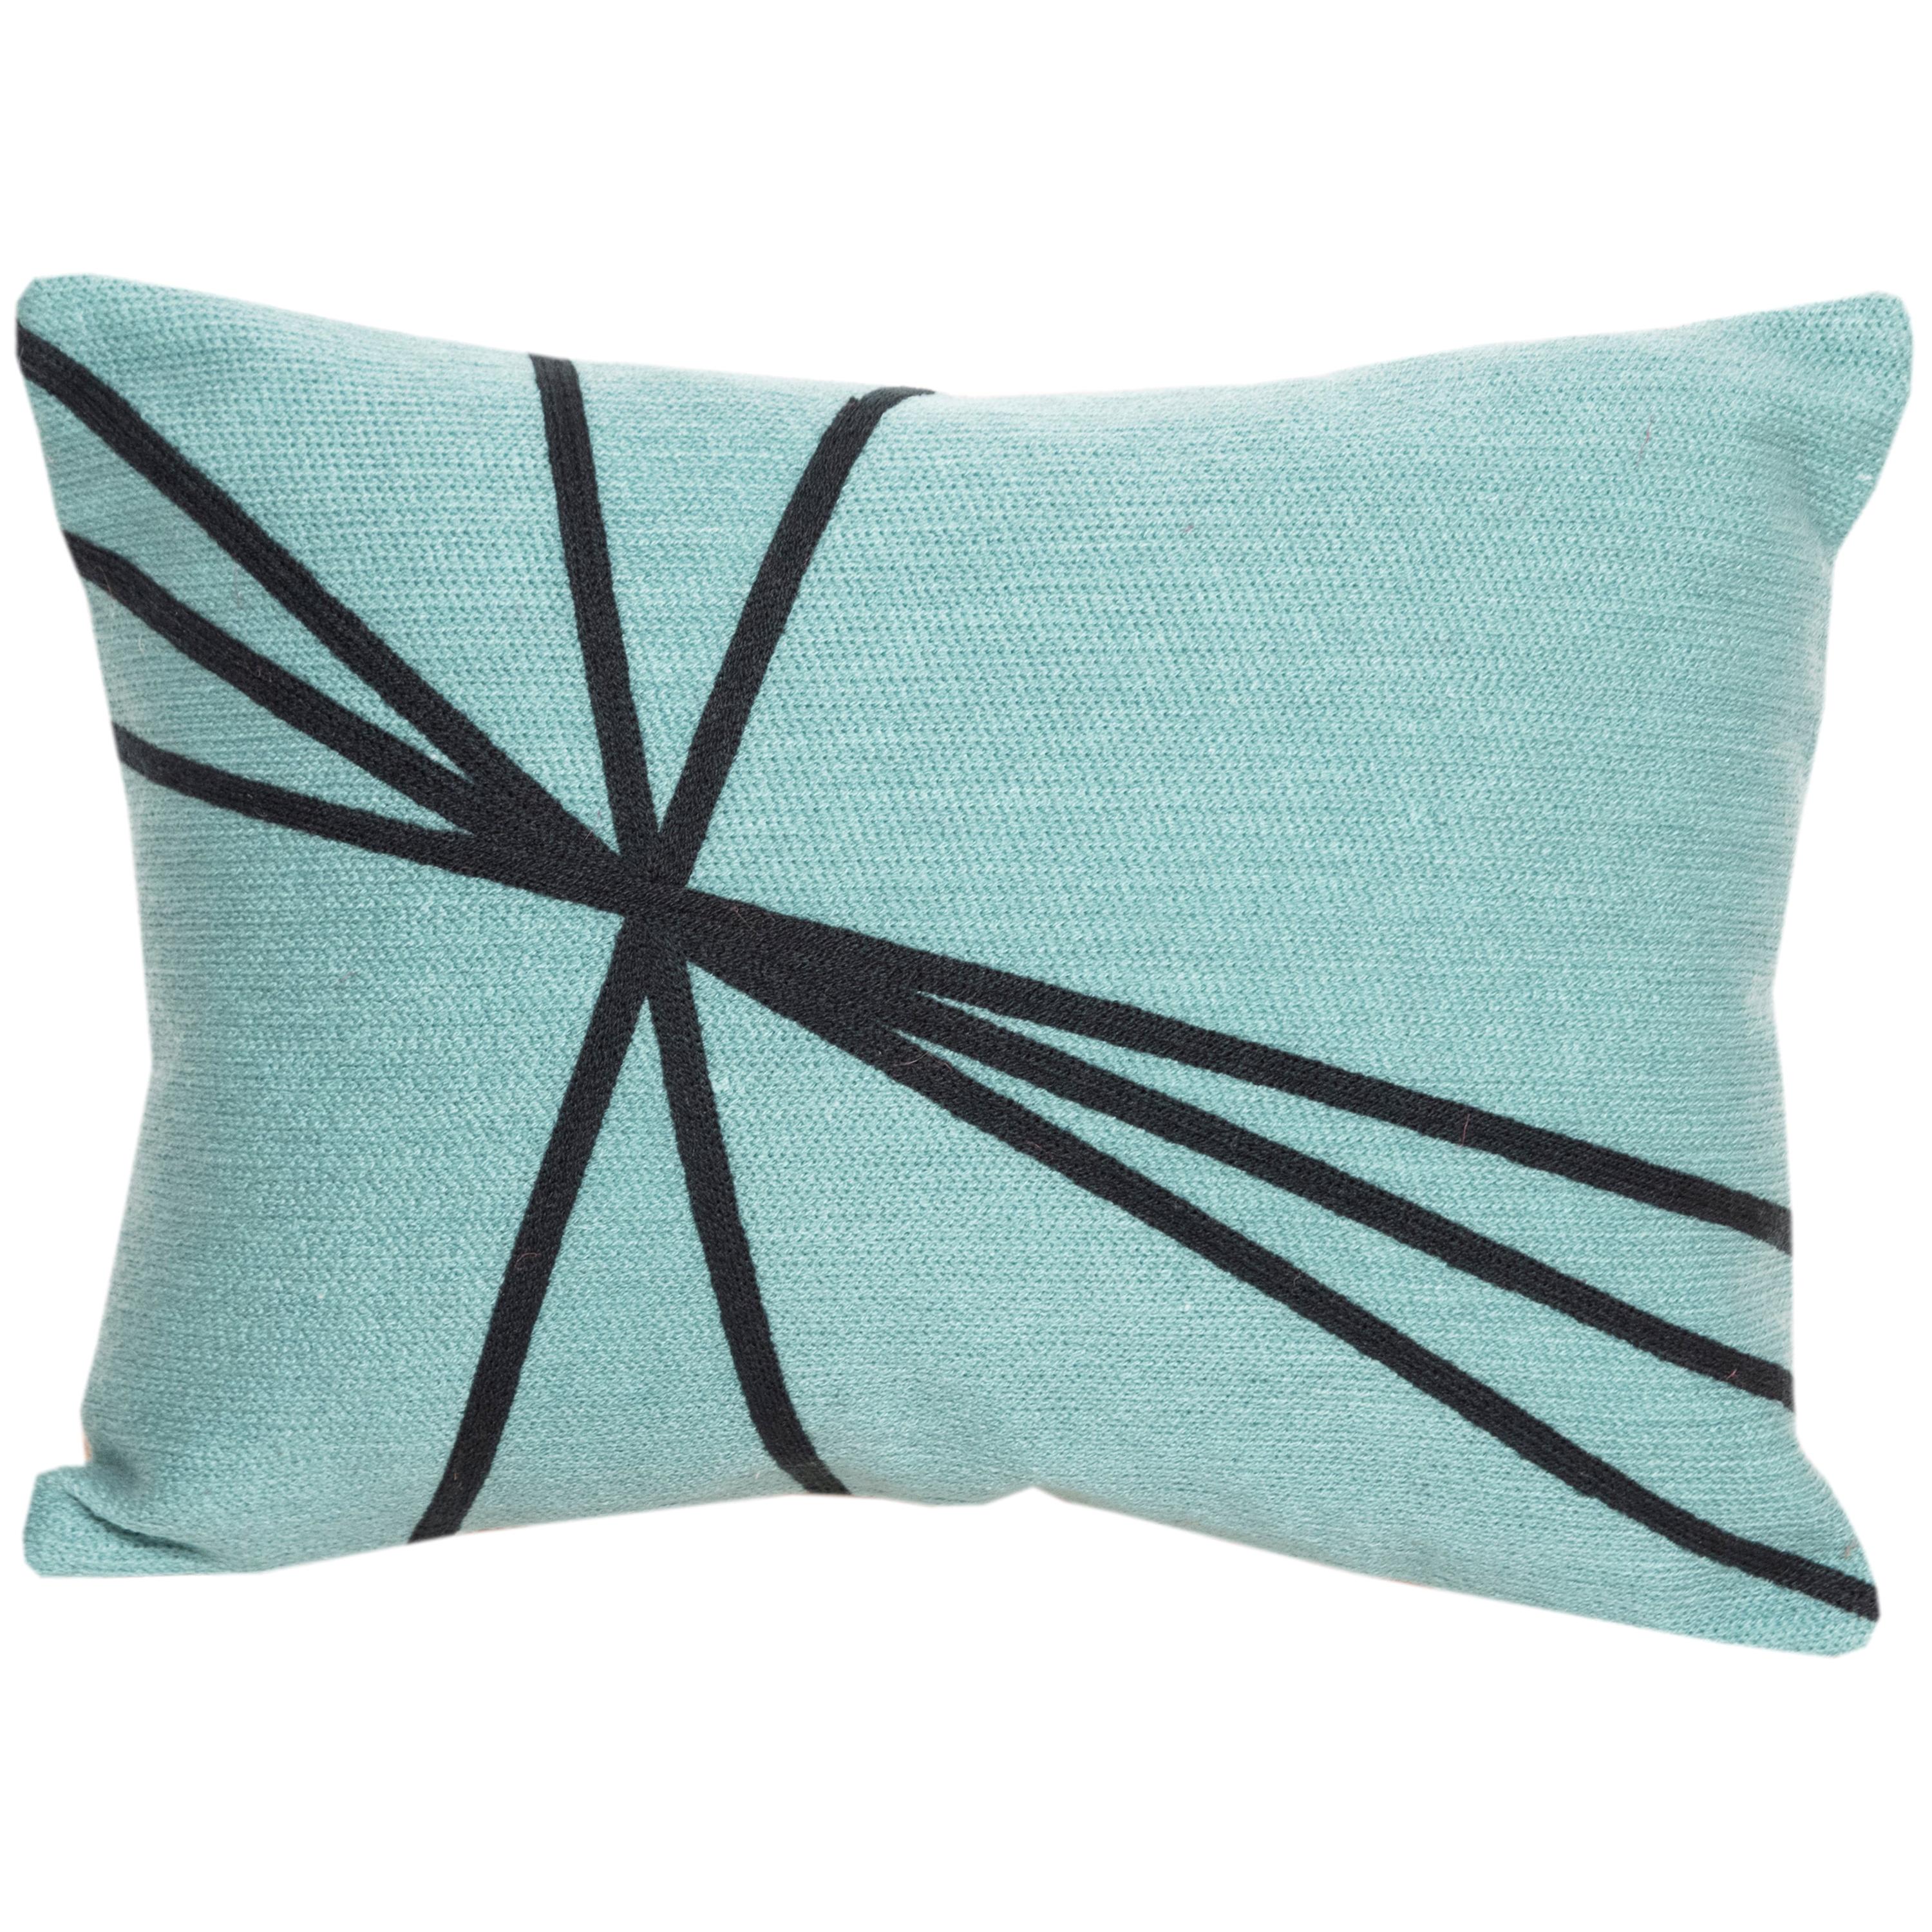 Modern Kilombo Home Embroidery Pillow Cushion Cotton Turquoise Navy blue